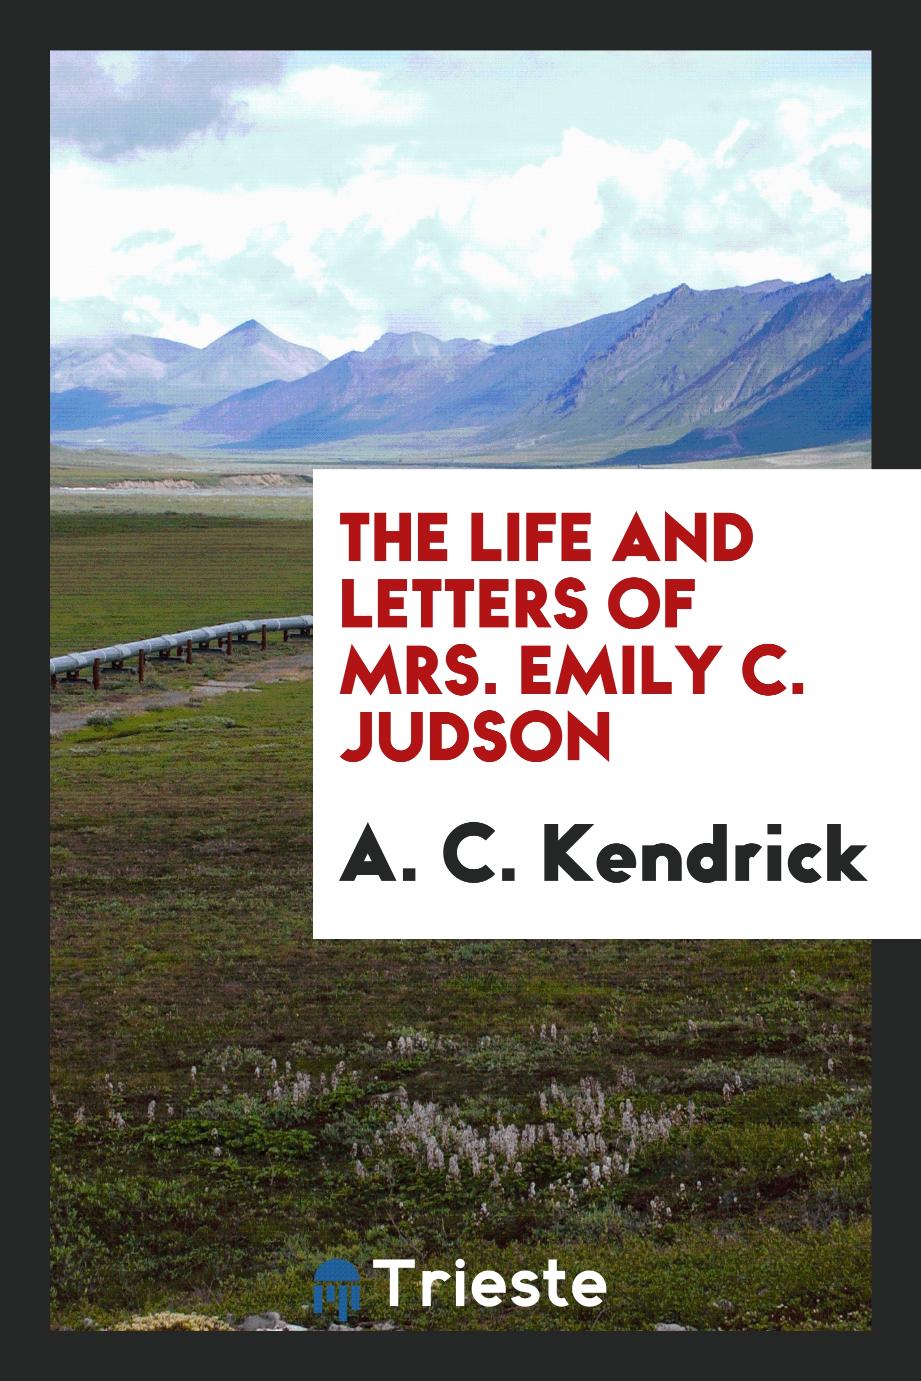 The life and letters of mrs. Emily C. Judson